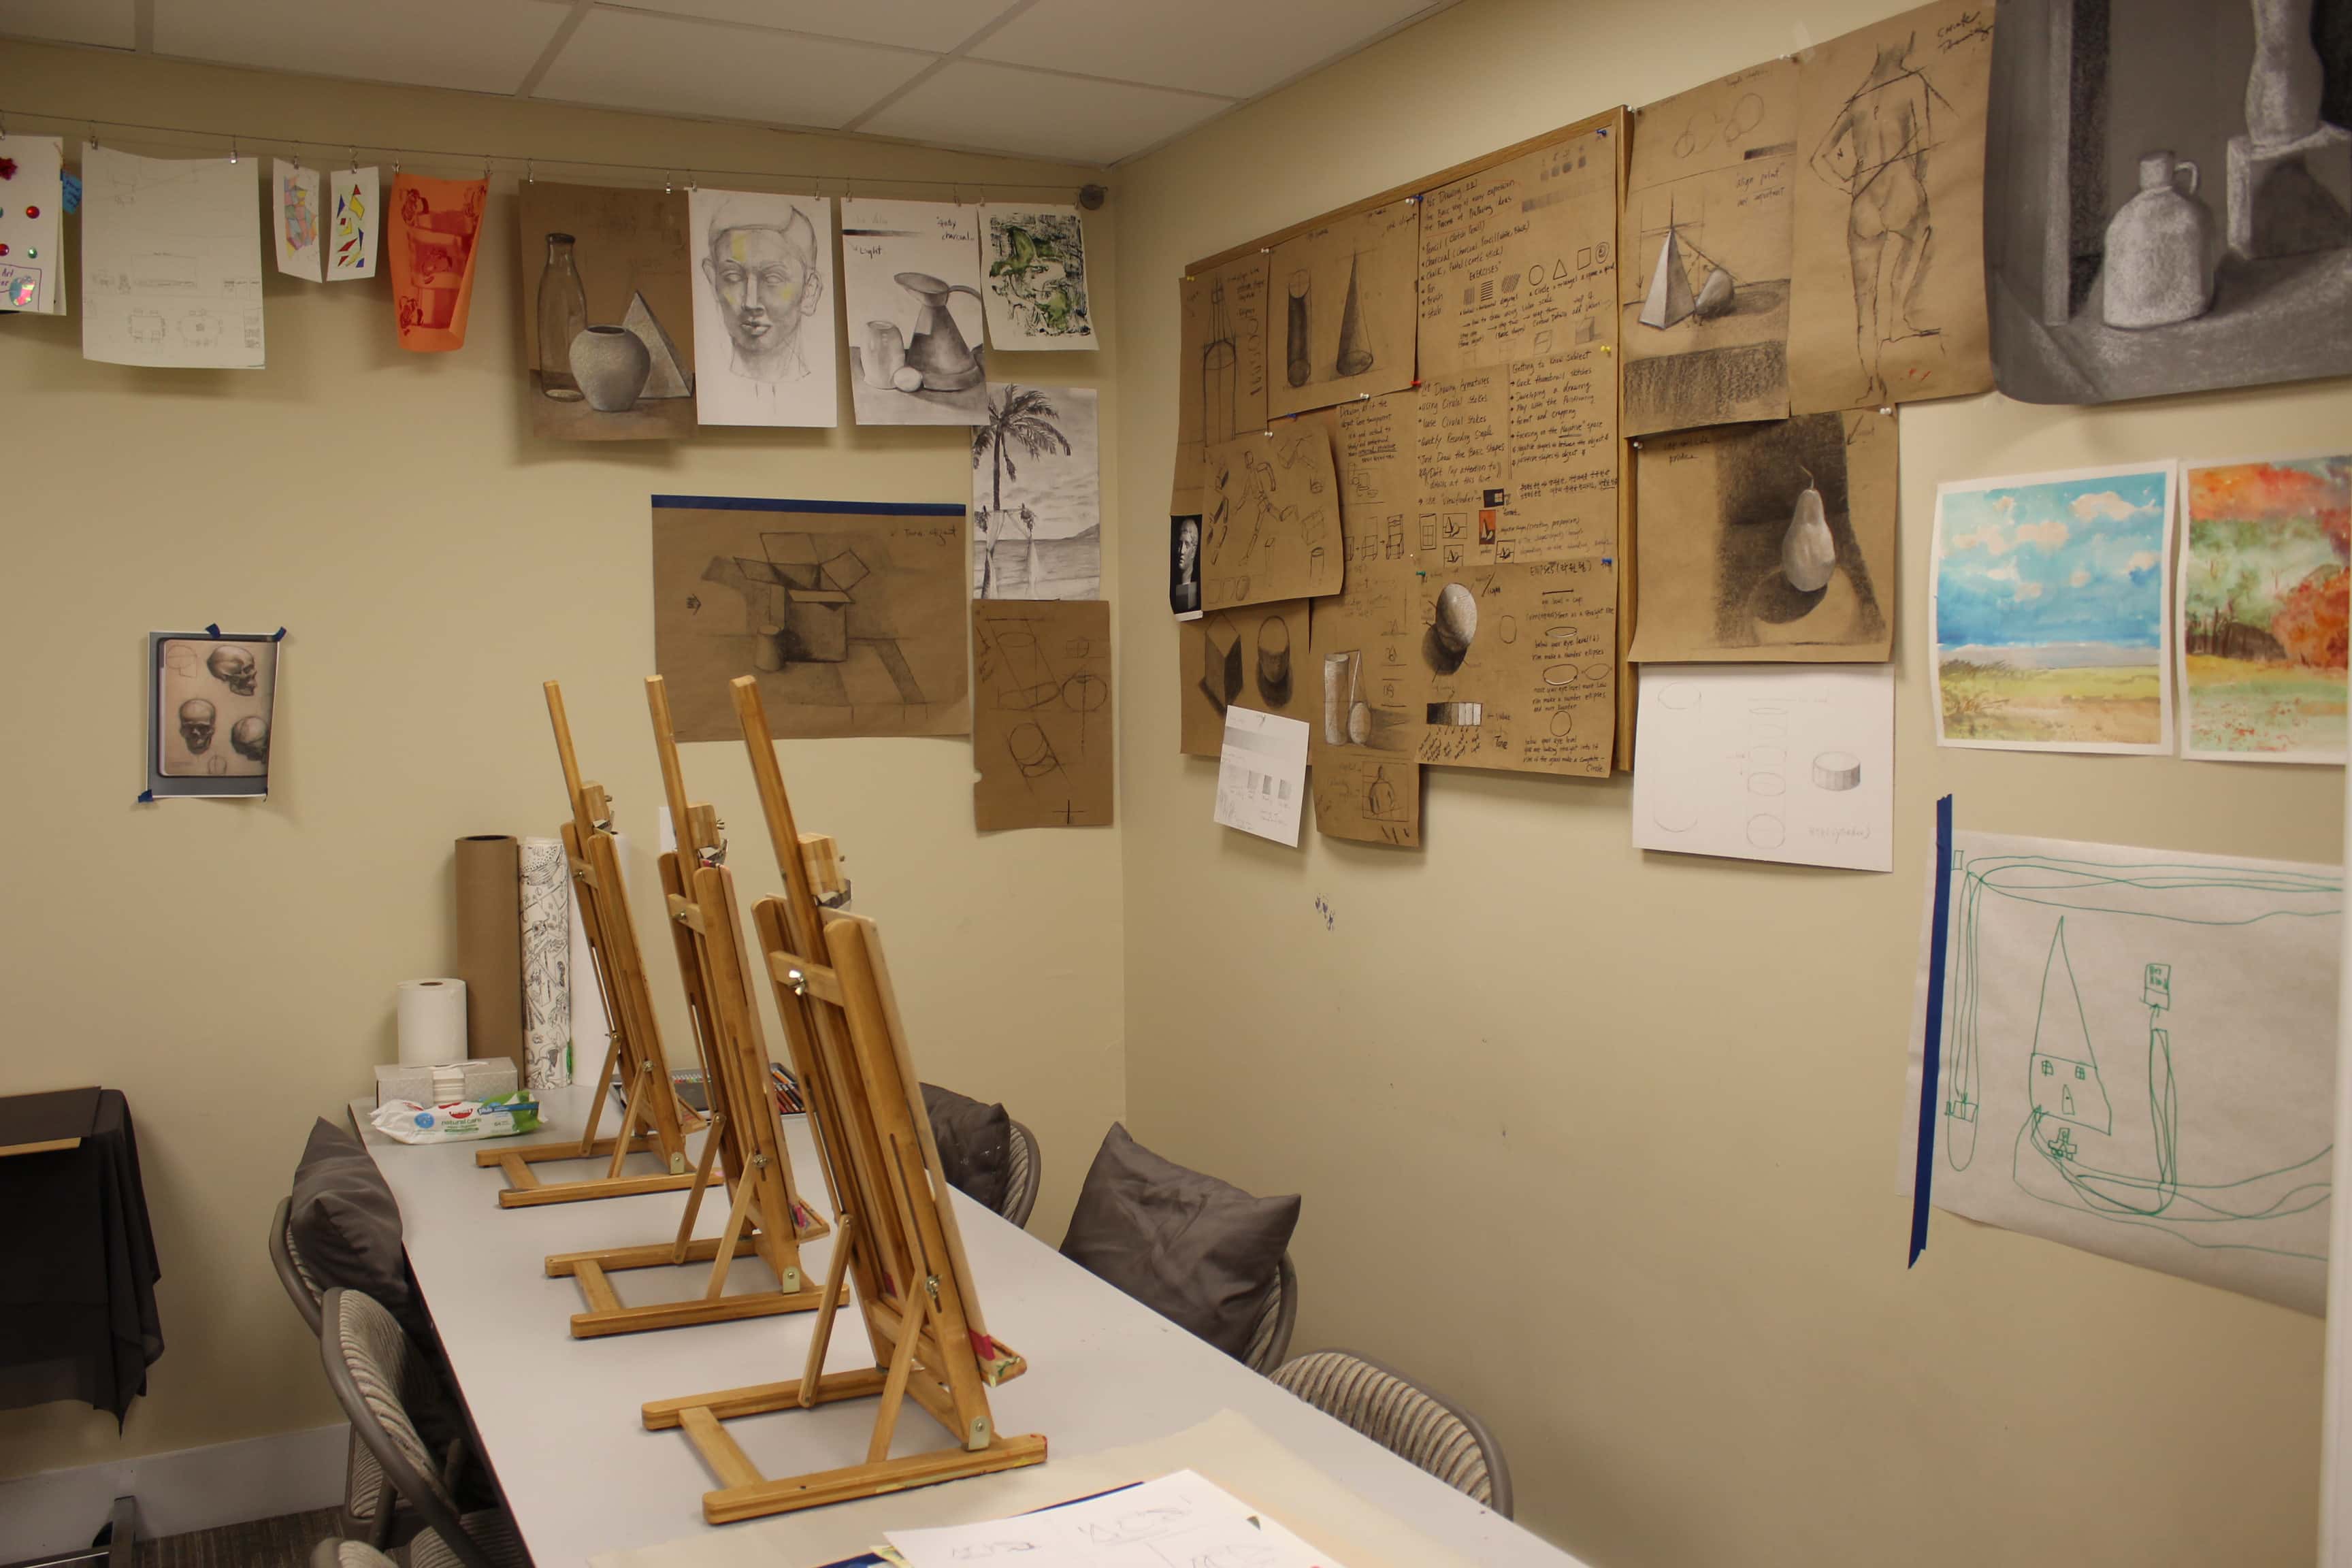 Build your college art portfolio at Highlights Art School in Lansdale